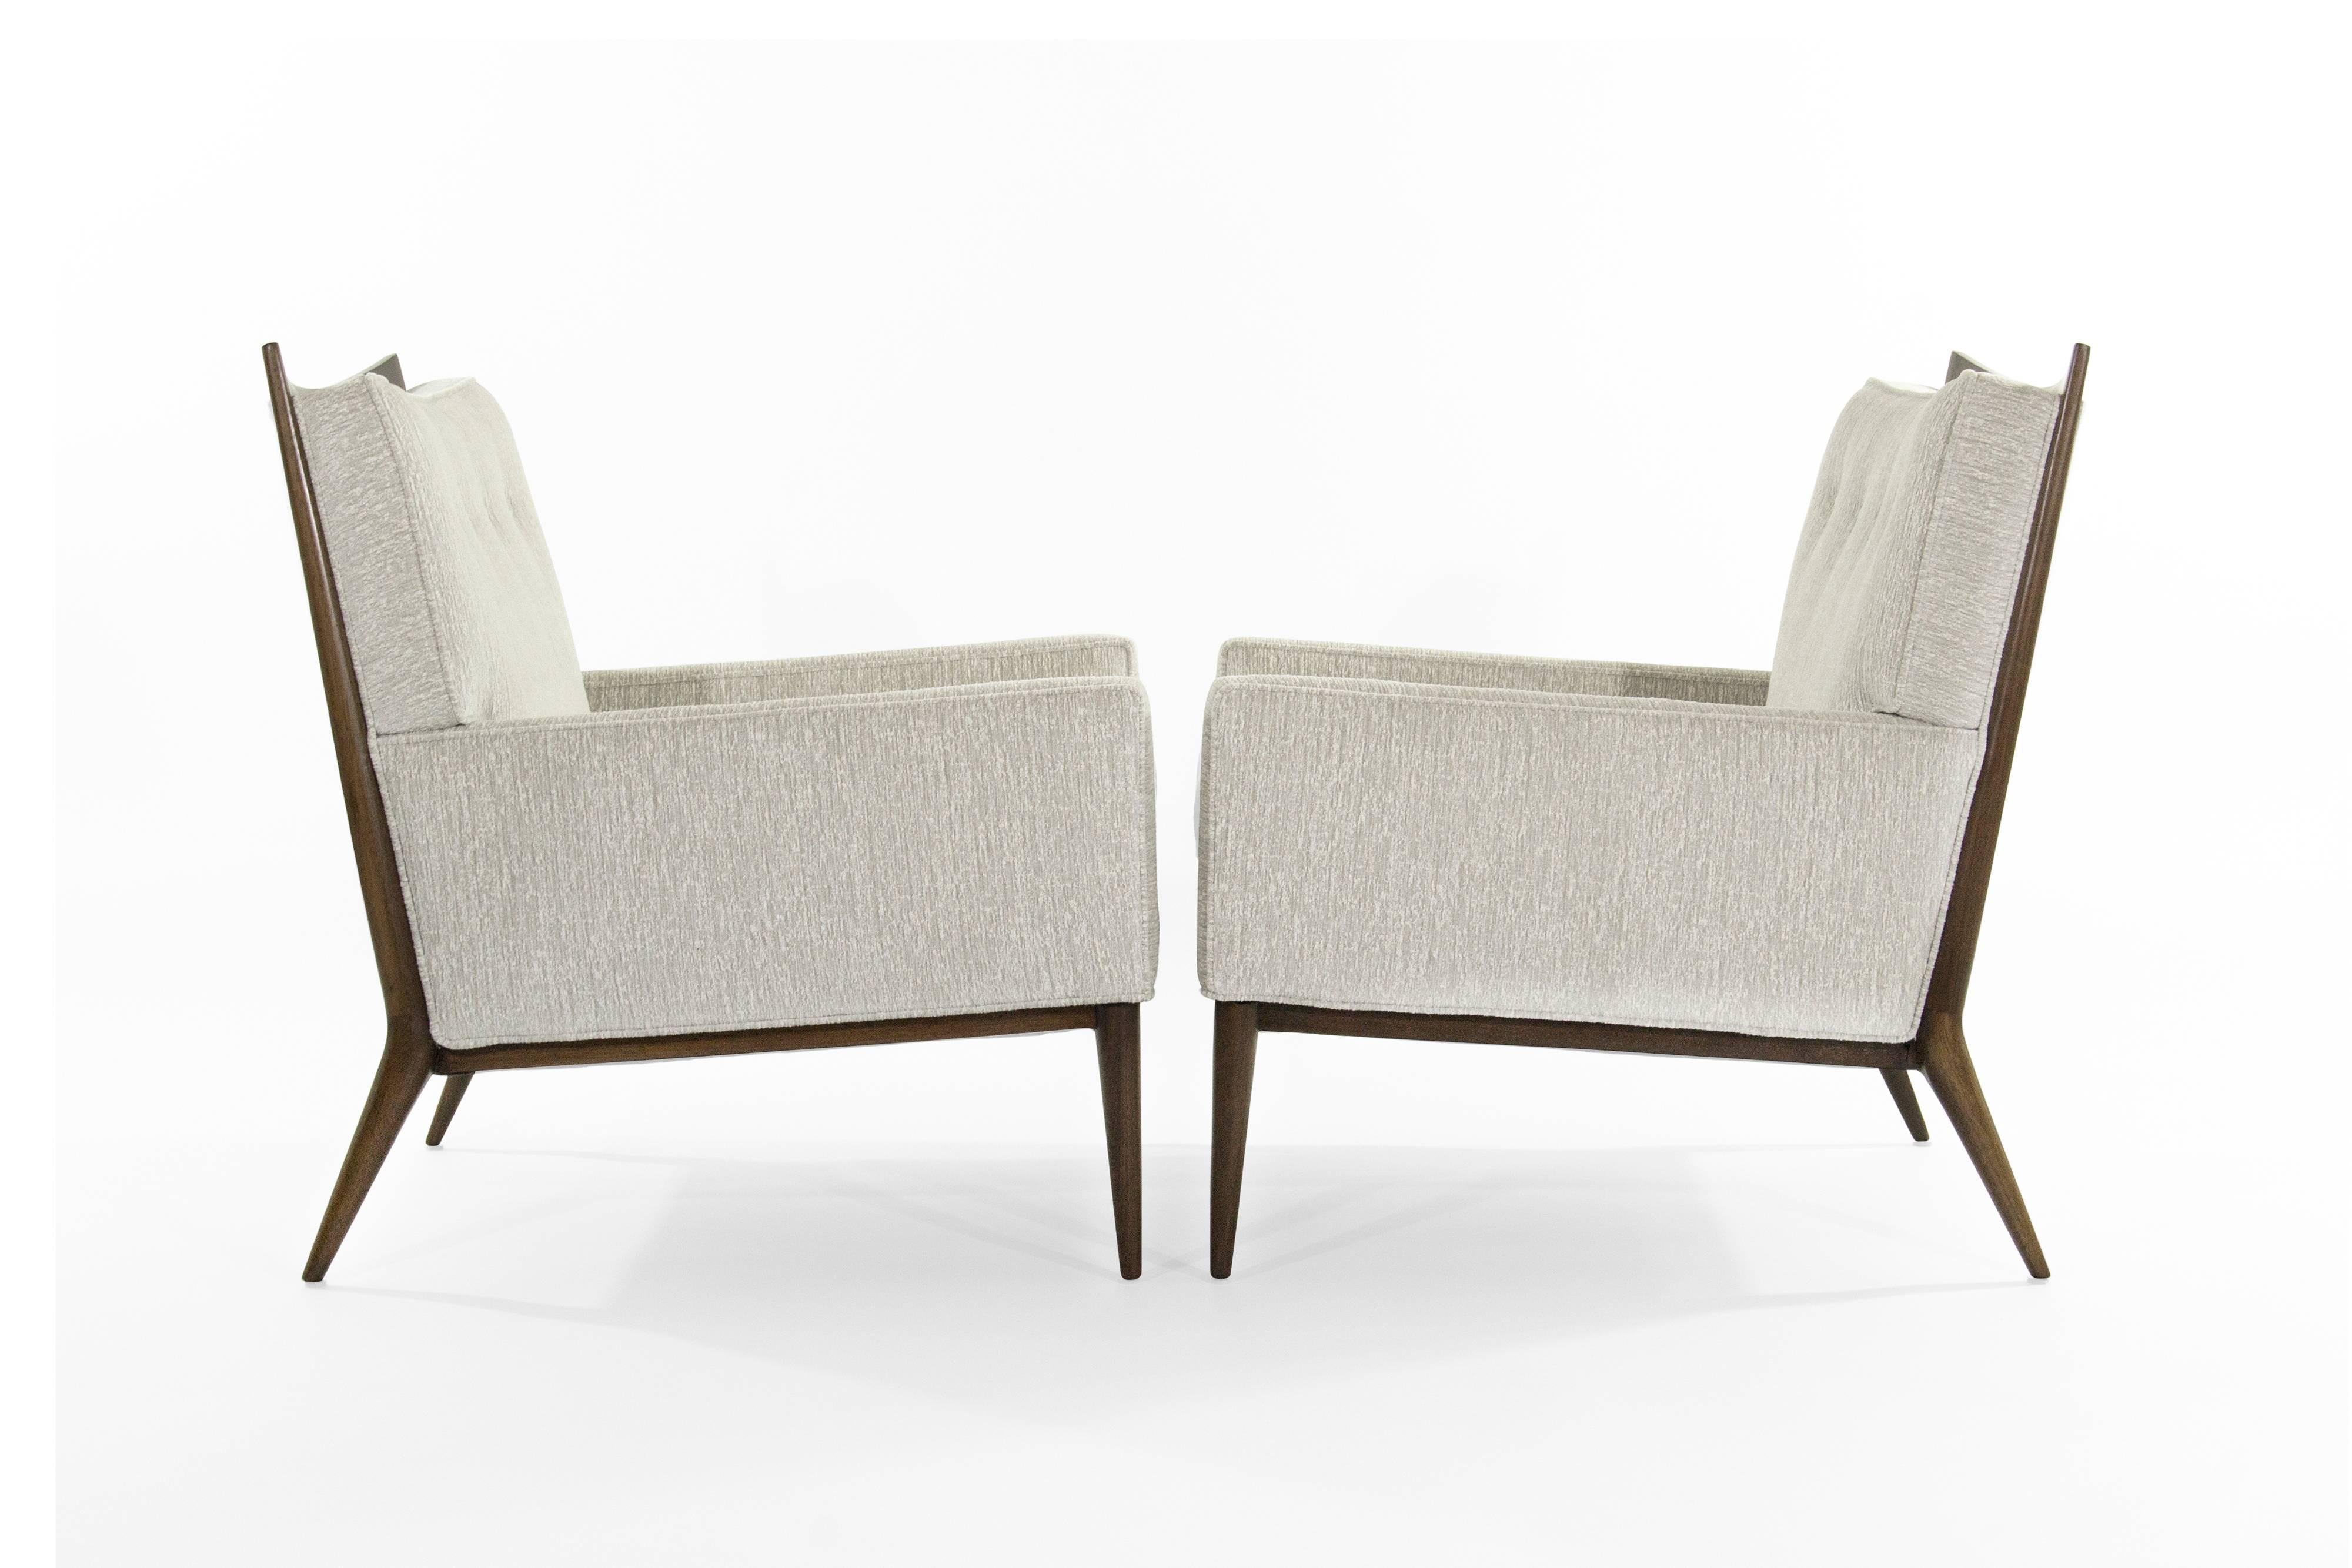 A set of lounge chairs designed by Paul McCobb for Directional, model 1322, circa 1950s.

Walnut frame fully restored, newly upholstered in light grey chenille by James Huniford.